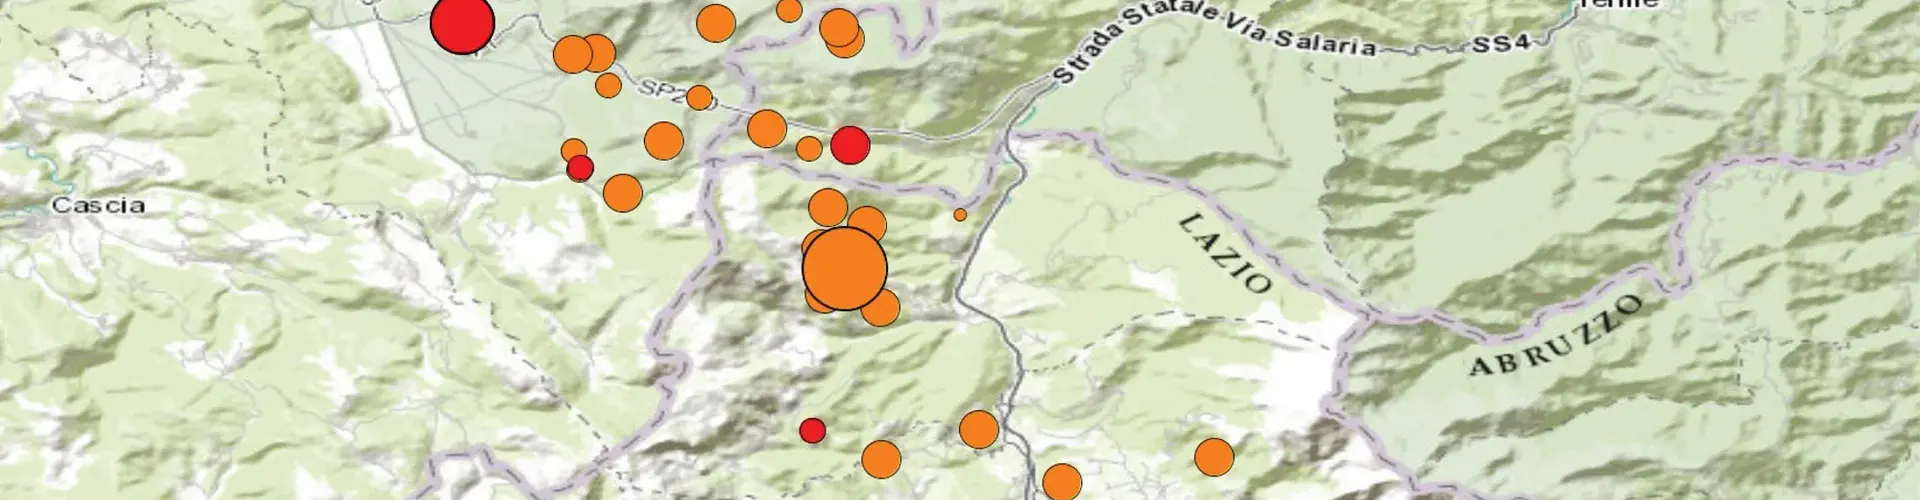 Detail of an INGV terremoti map with information on the location, magnitude and time of the central Italy earthquake and its aftershocks (Credit: INGV terremoti)